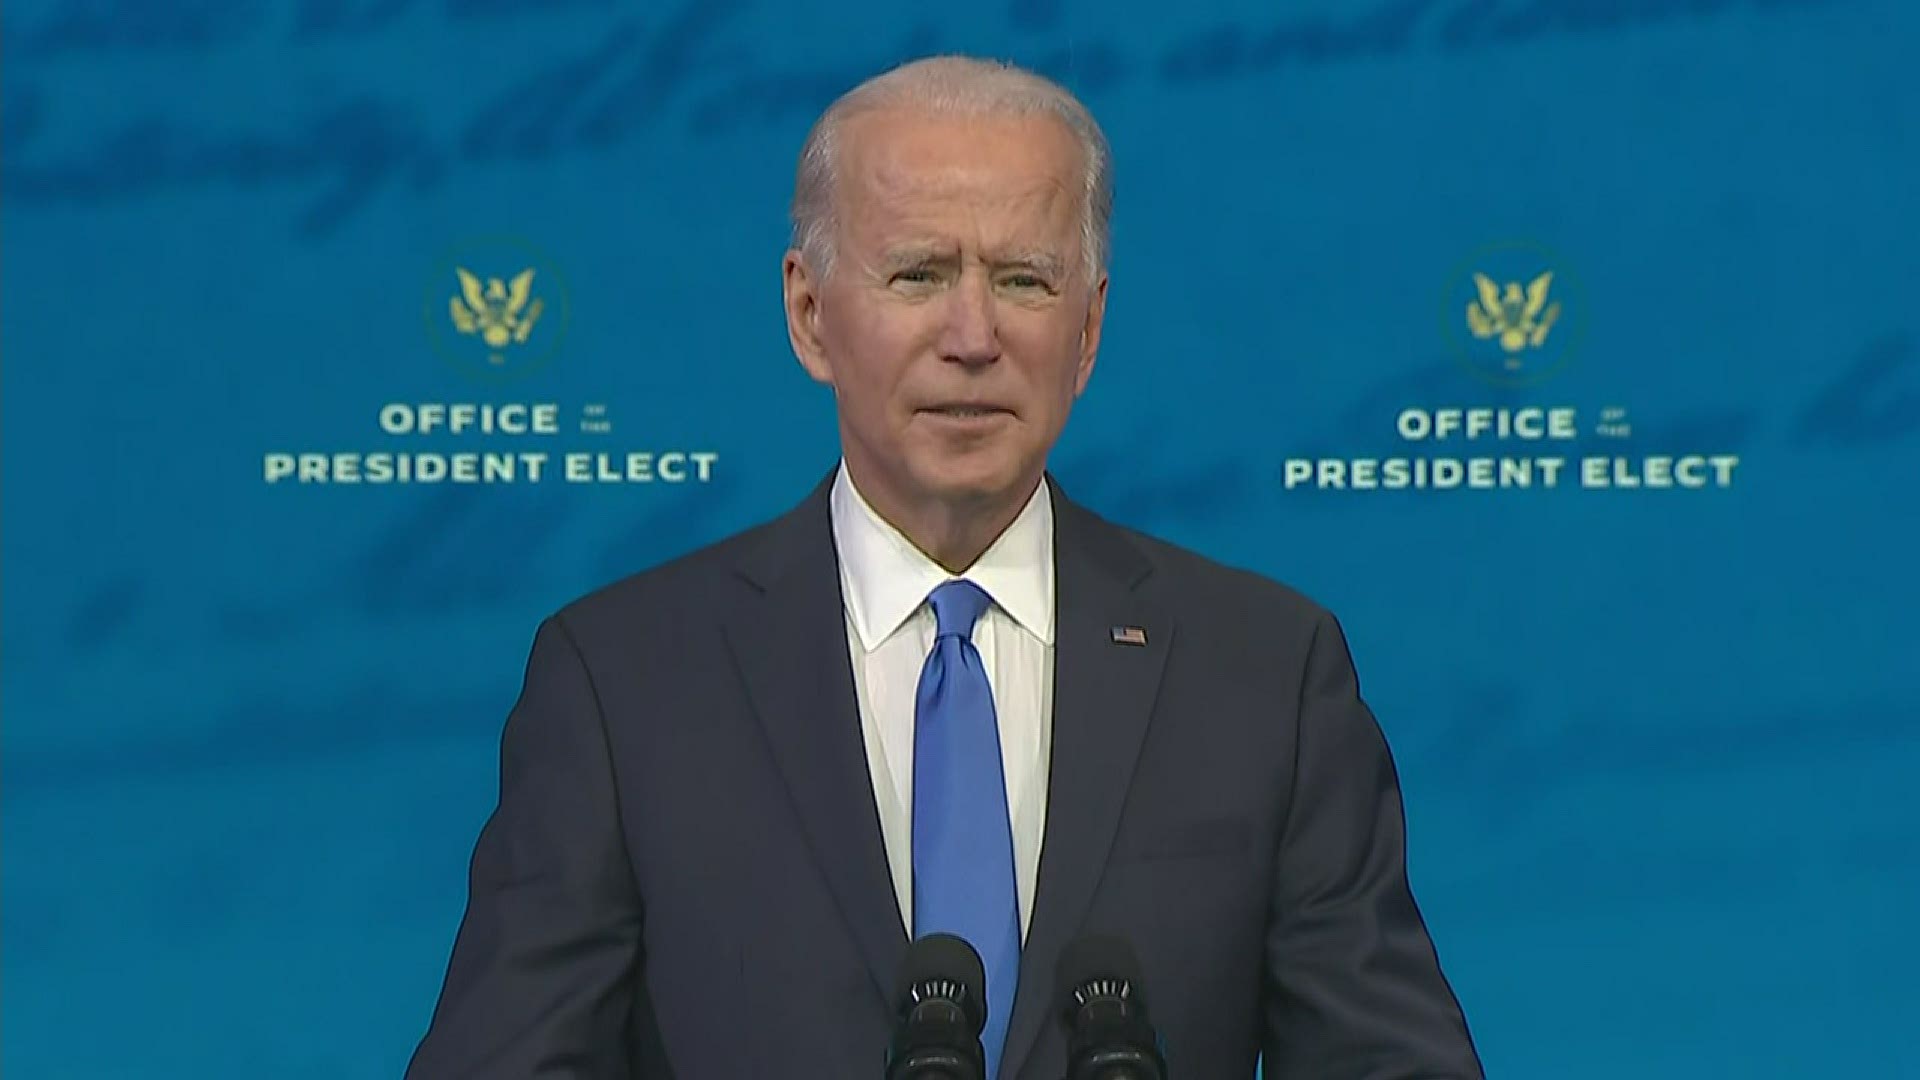 President-Elect Joe Biden took aim at President Trump's election challenges hours after the Electoral College reaffirmed Biden's victory.